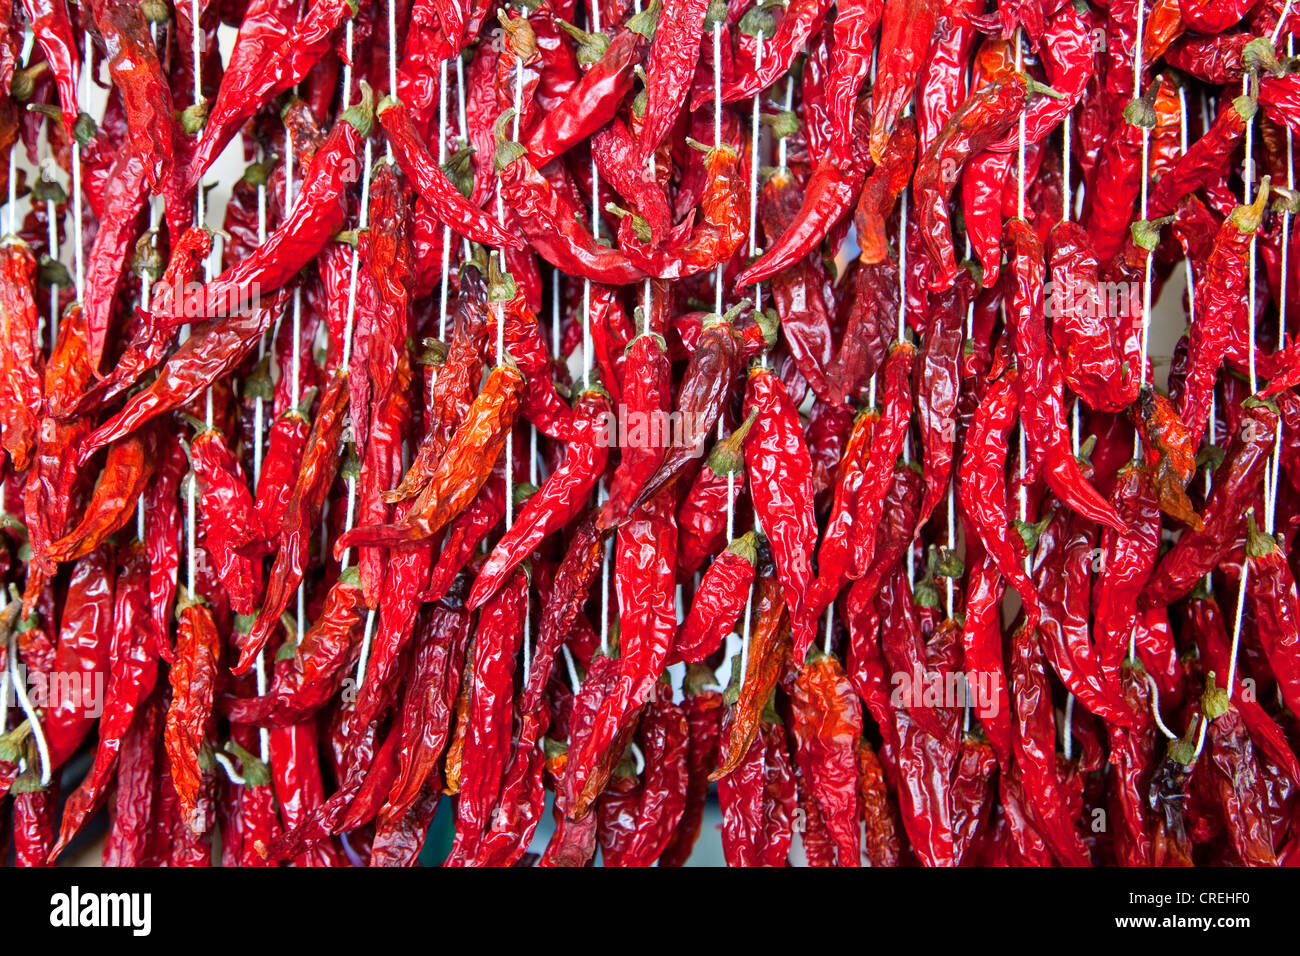 Chili peppers (Capsicum), on the market in Funchal, Madeira, Portugal, Europe Stock Photo